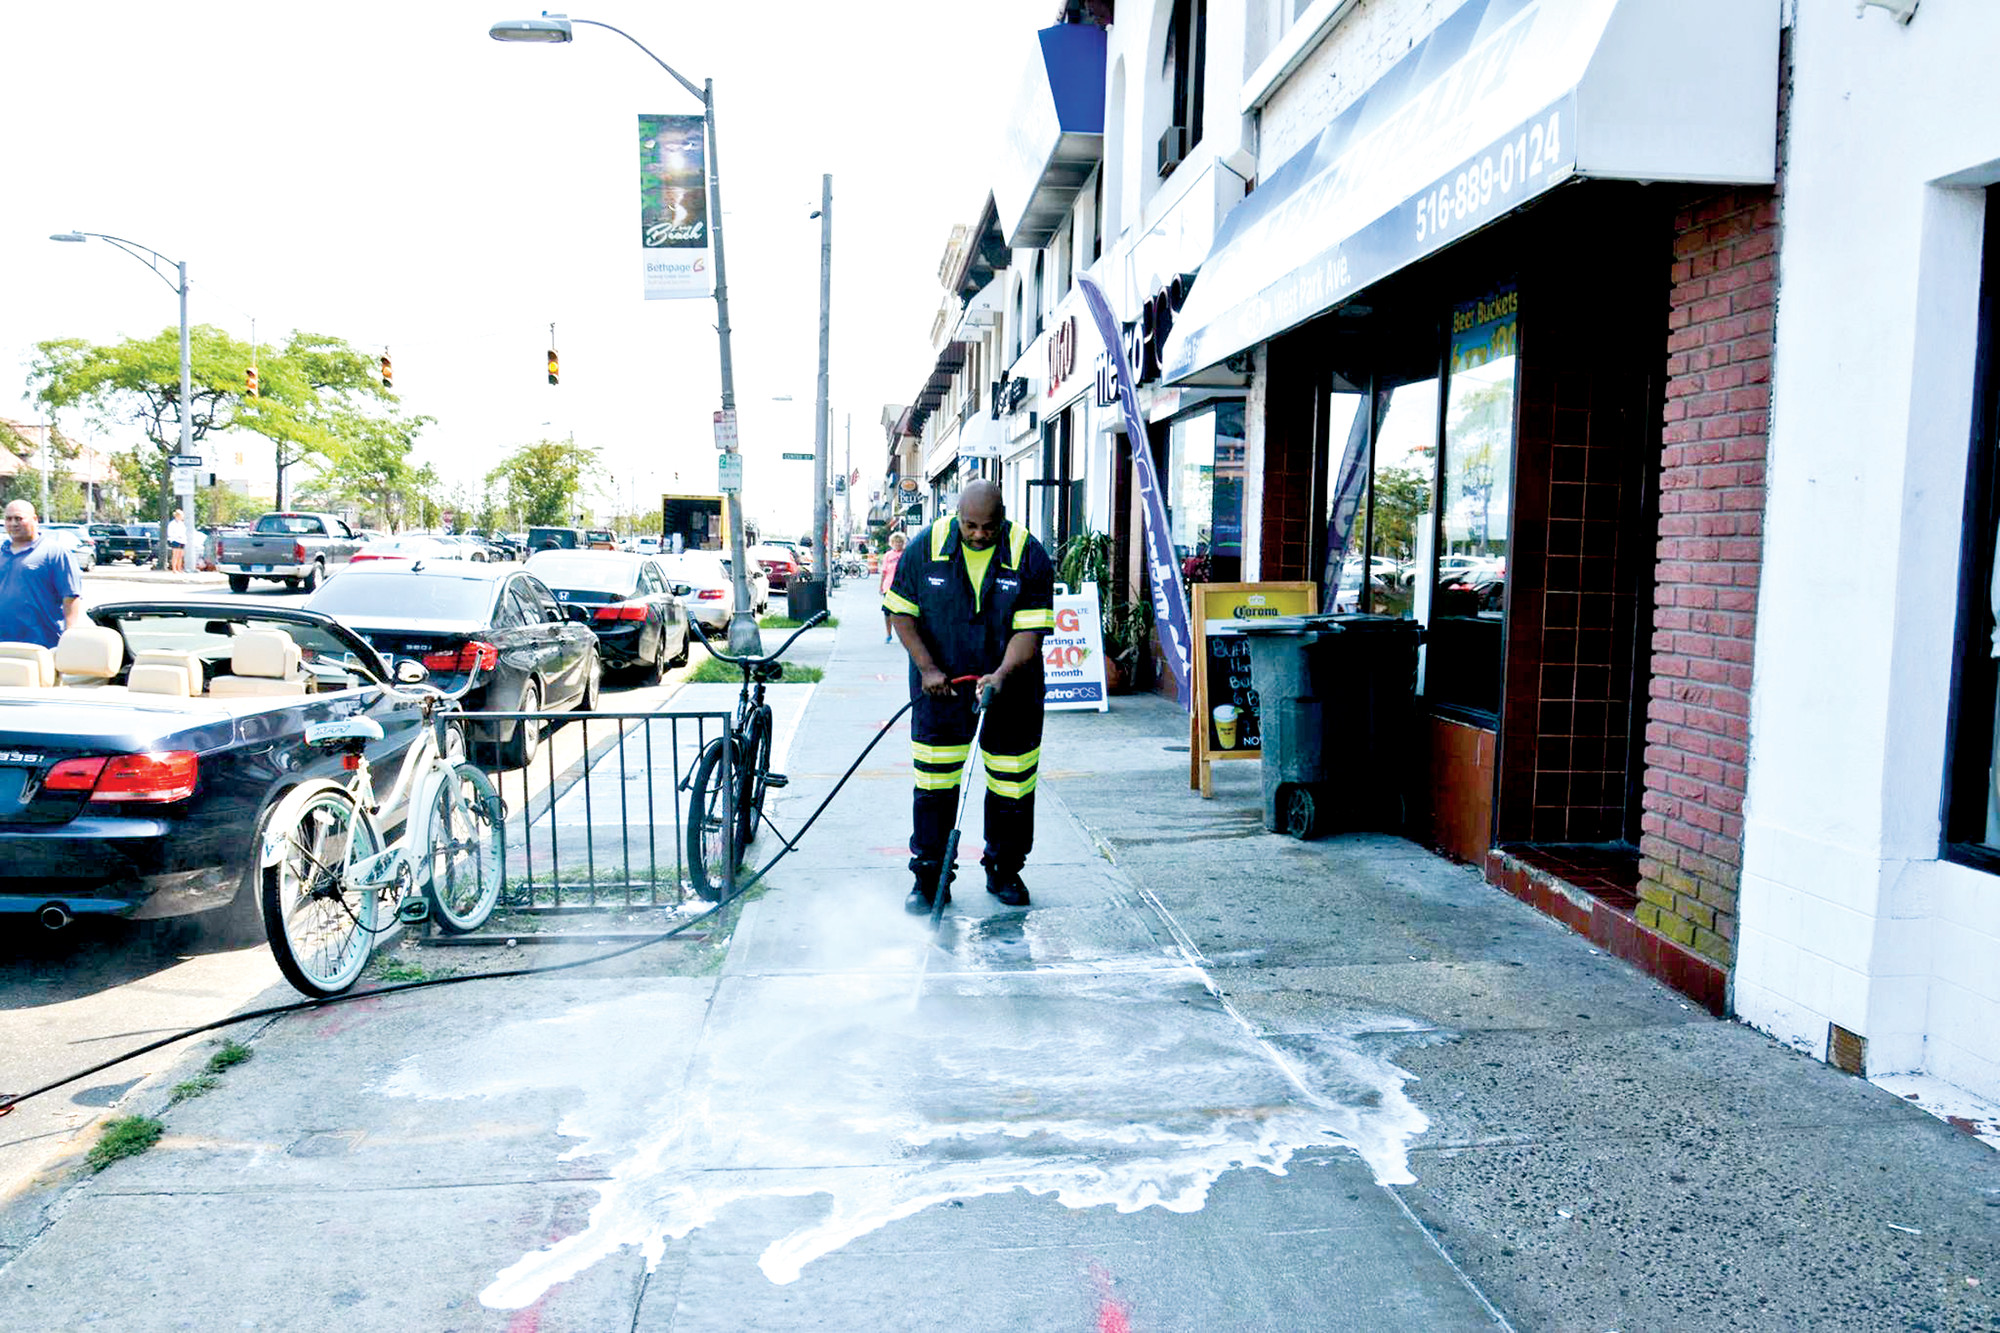 For the first time ever, the city regularly powerwashed sidewalks this summer in accordance with a new streetscaping initiative to improve the downtown area and provide a boost to local businesses.